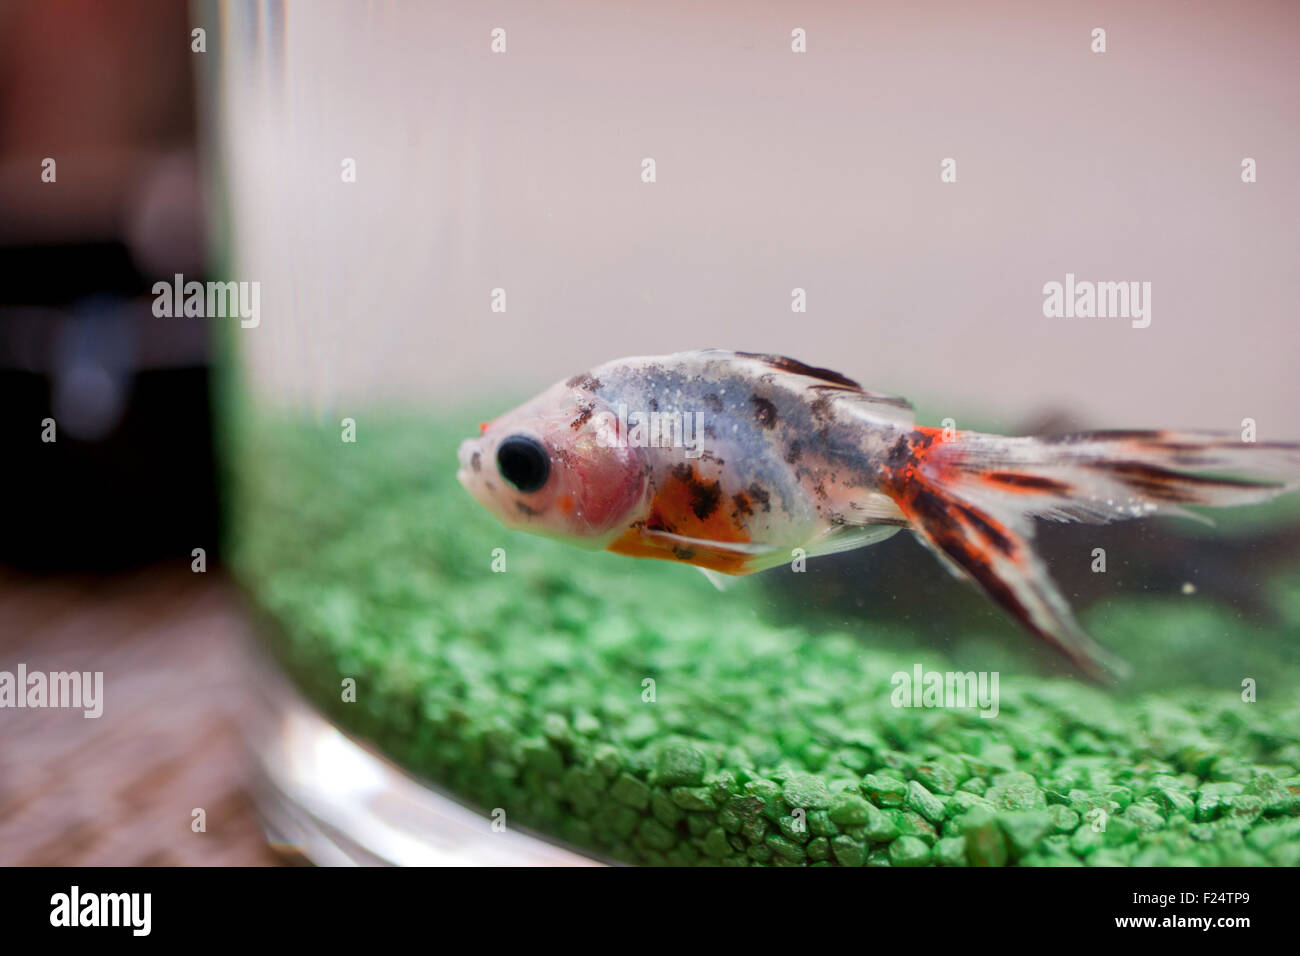 A Fish in aquarium with fake grass Stock Photo